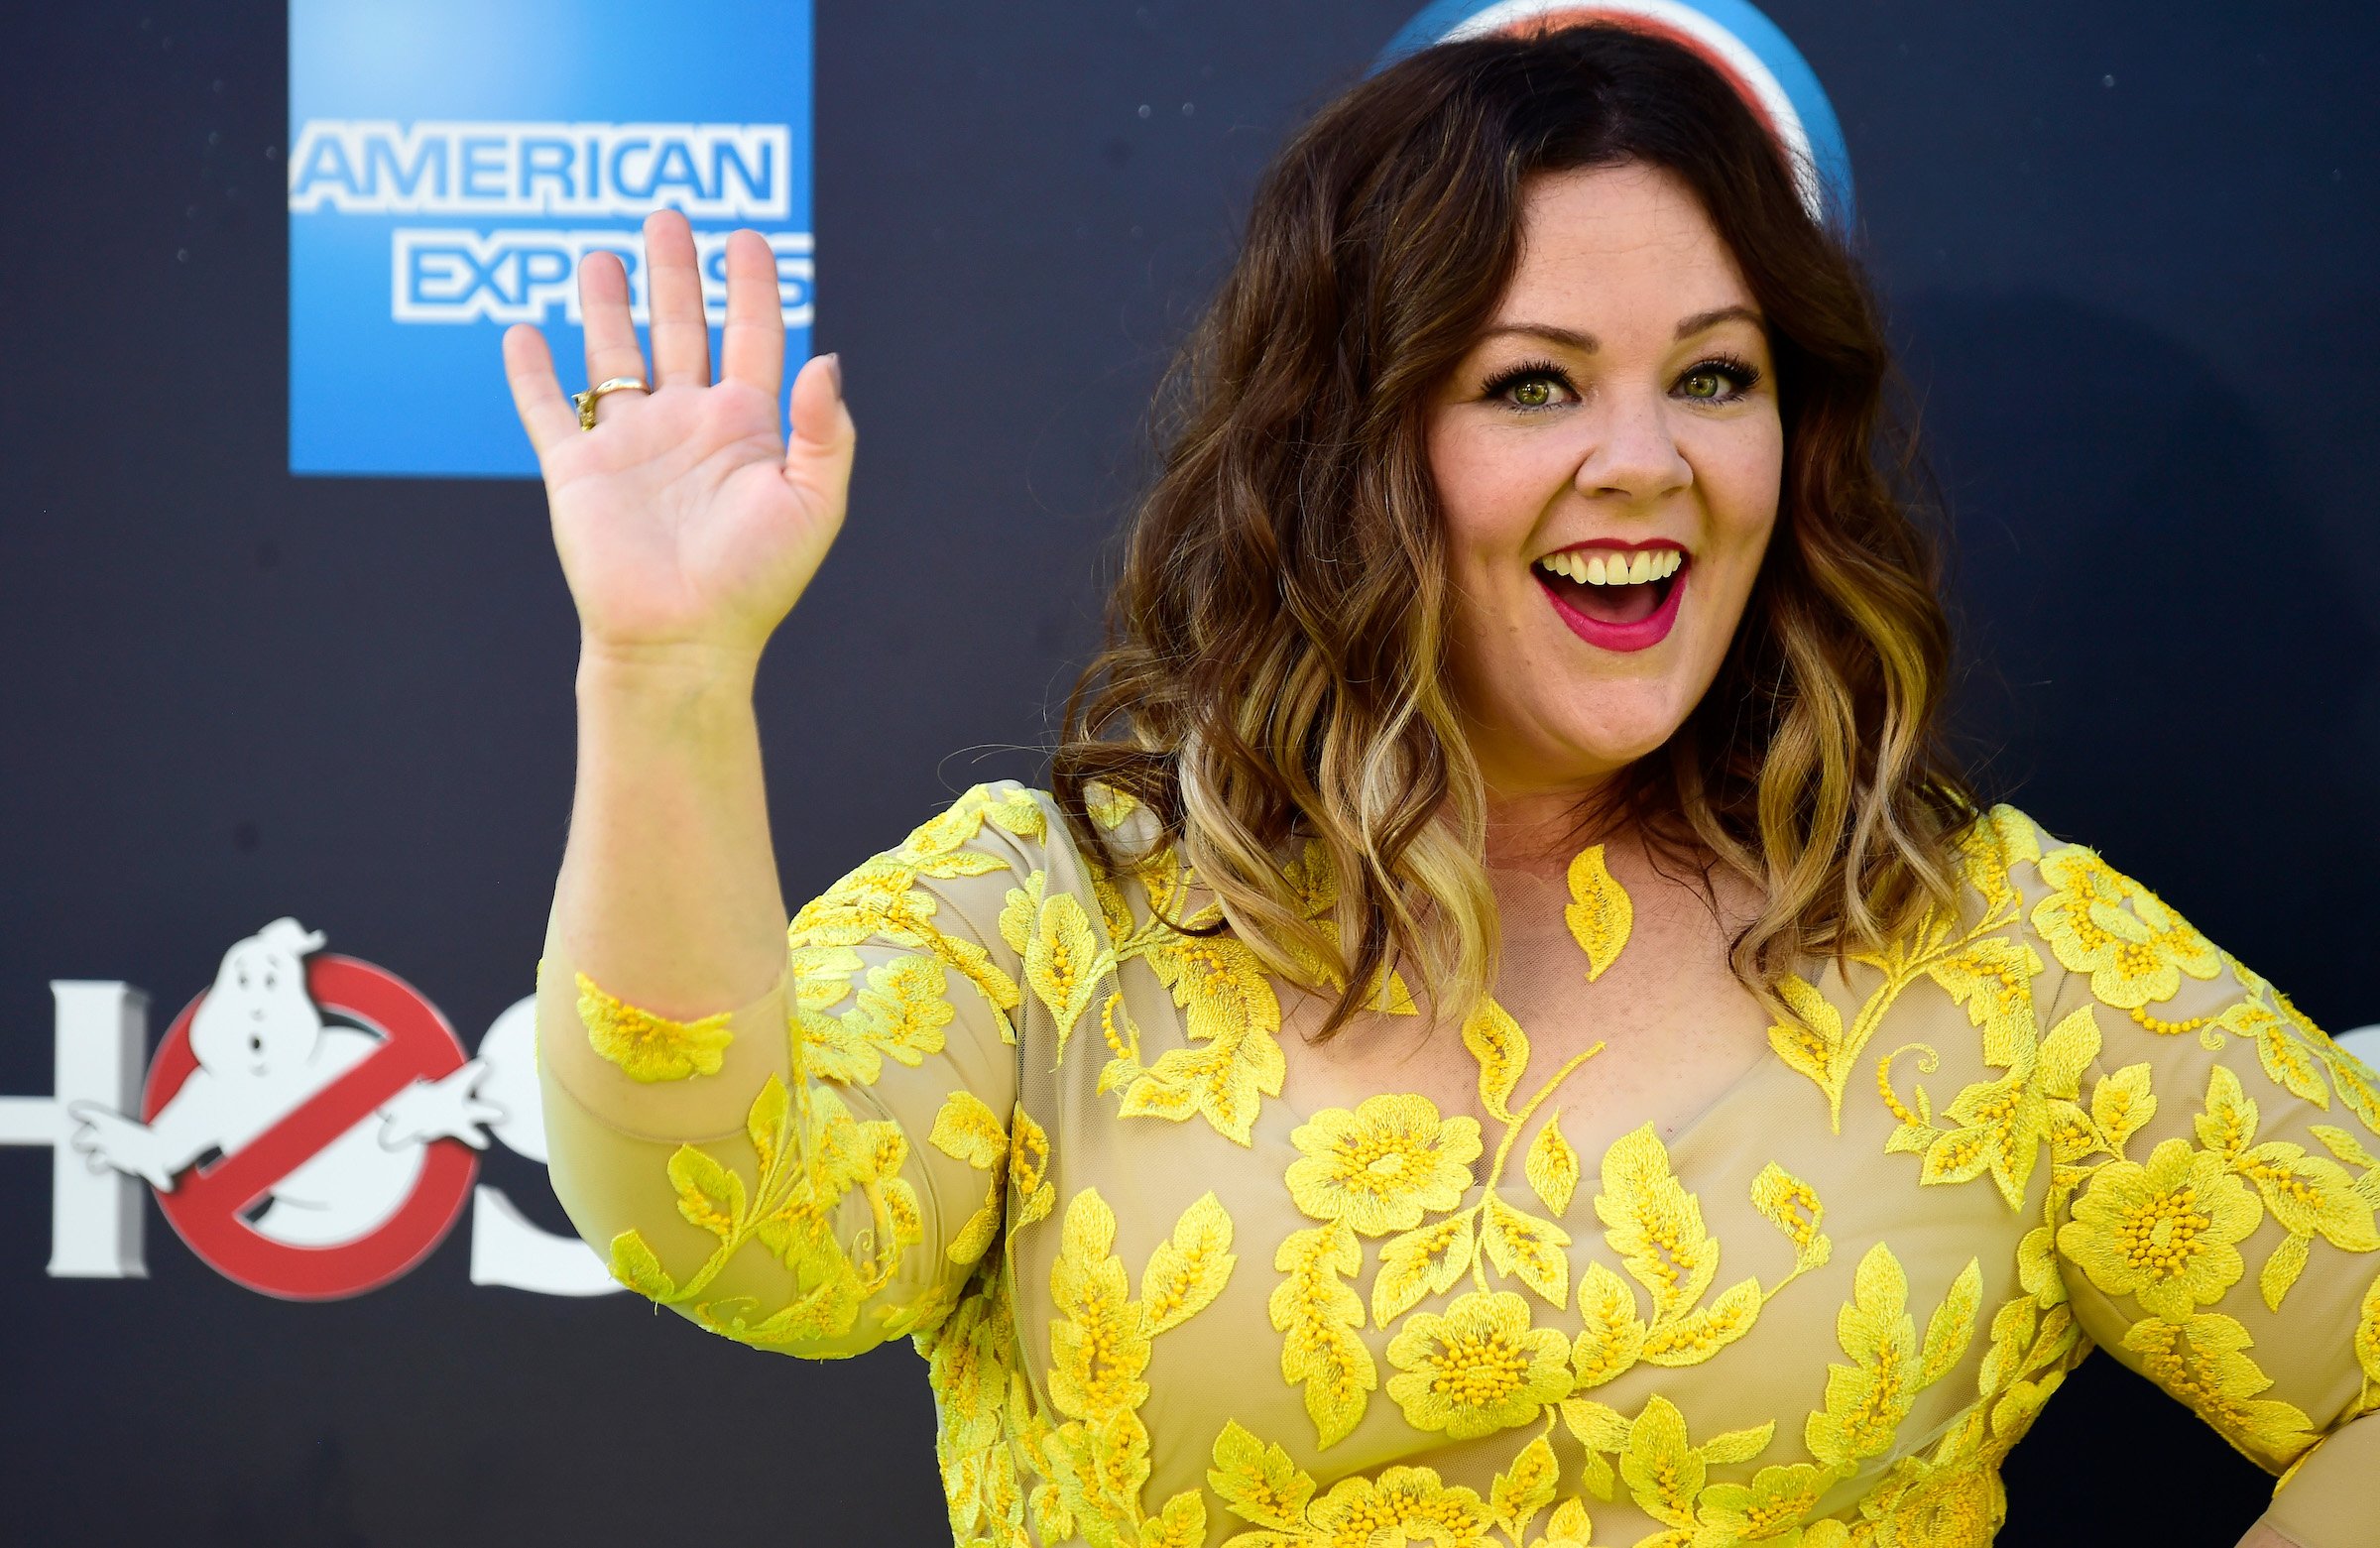 Melissa McCarthy star of The Starling delightfully smiles at a Sony premiere